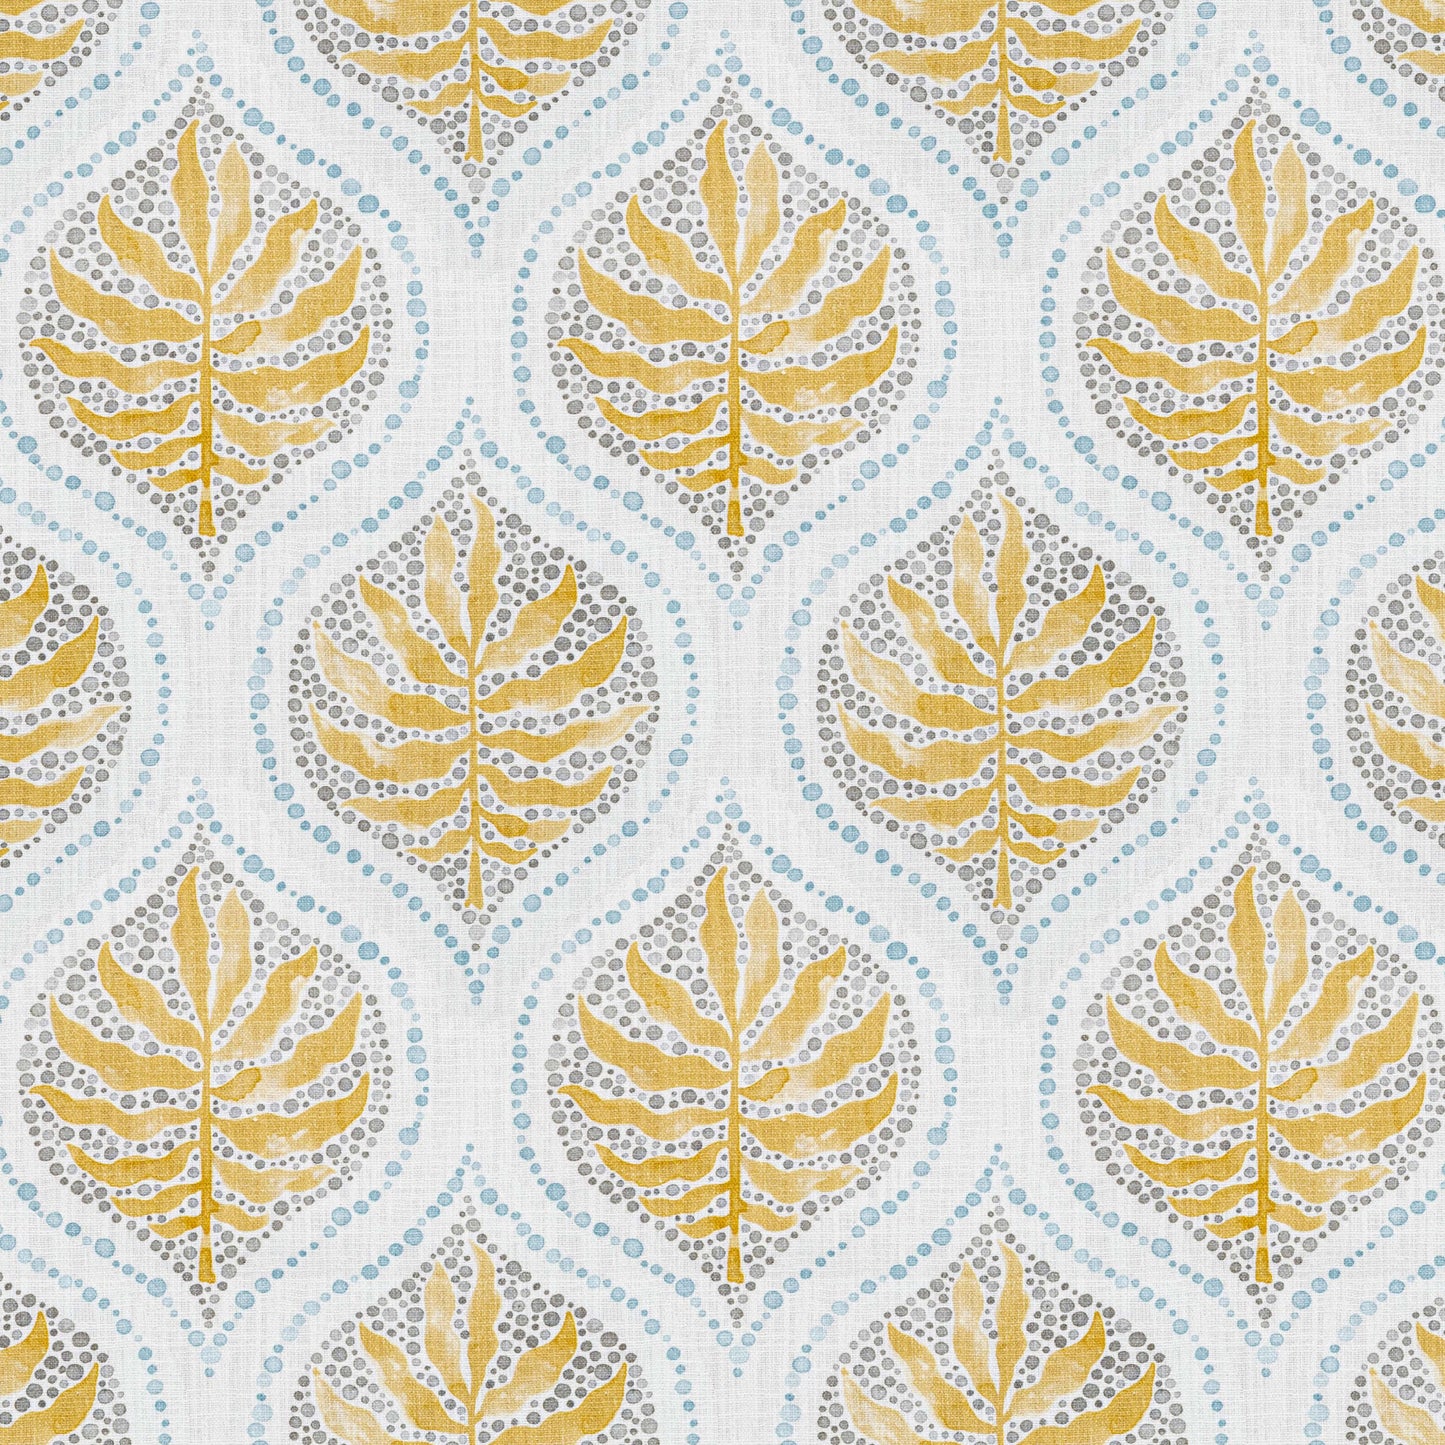 Pinch Pleated Curtain Panels Pair in Airlie Amber Ogee Floral Watercolor- Gold, Gray, Blue